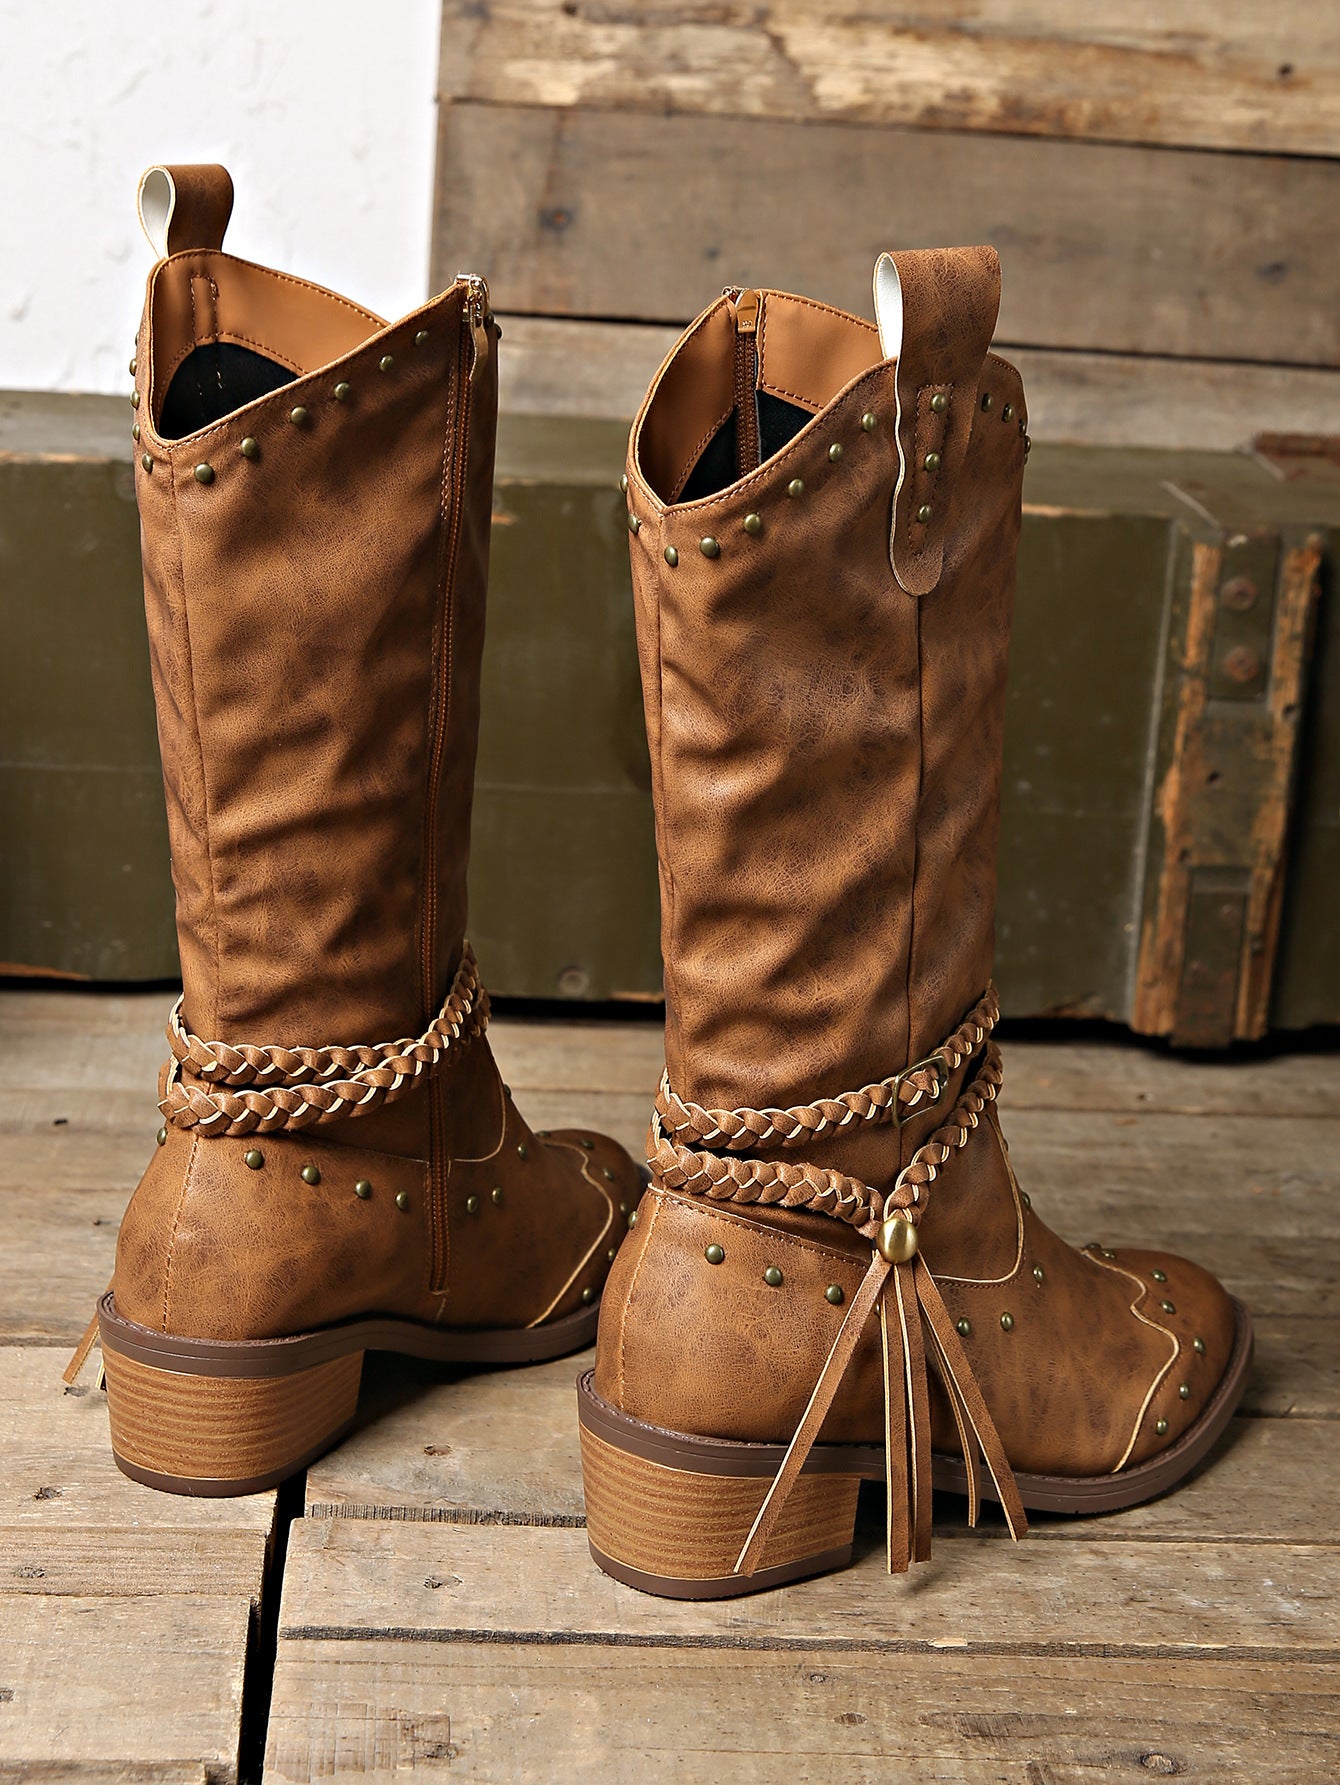 Women's Western Style Mid-Calf Cowboy Boots - Vintage Leather Look with Tassels and Buckles - Carvan Mart